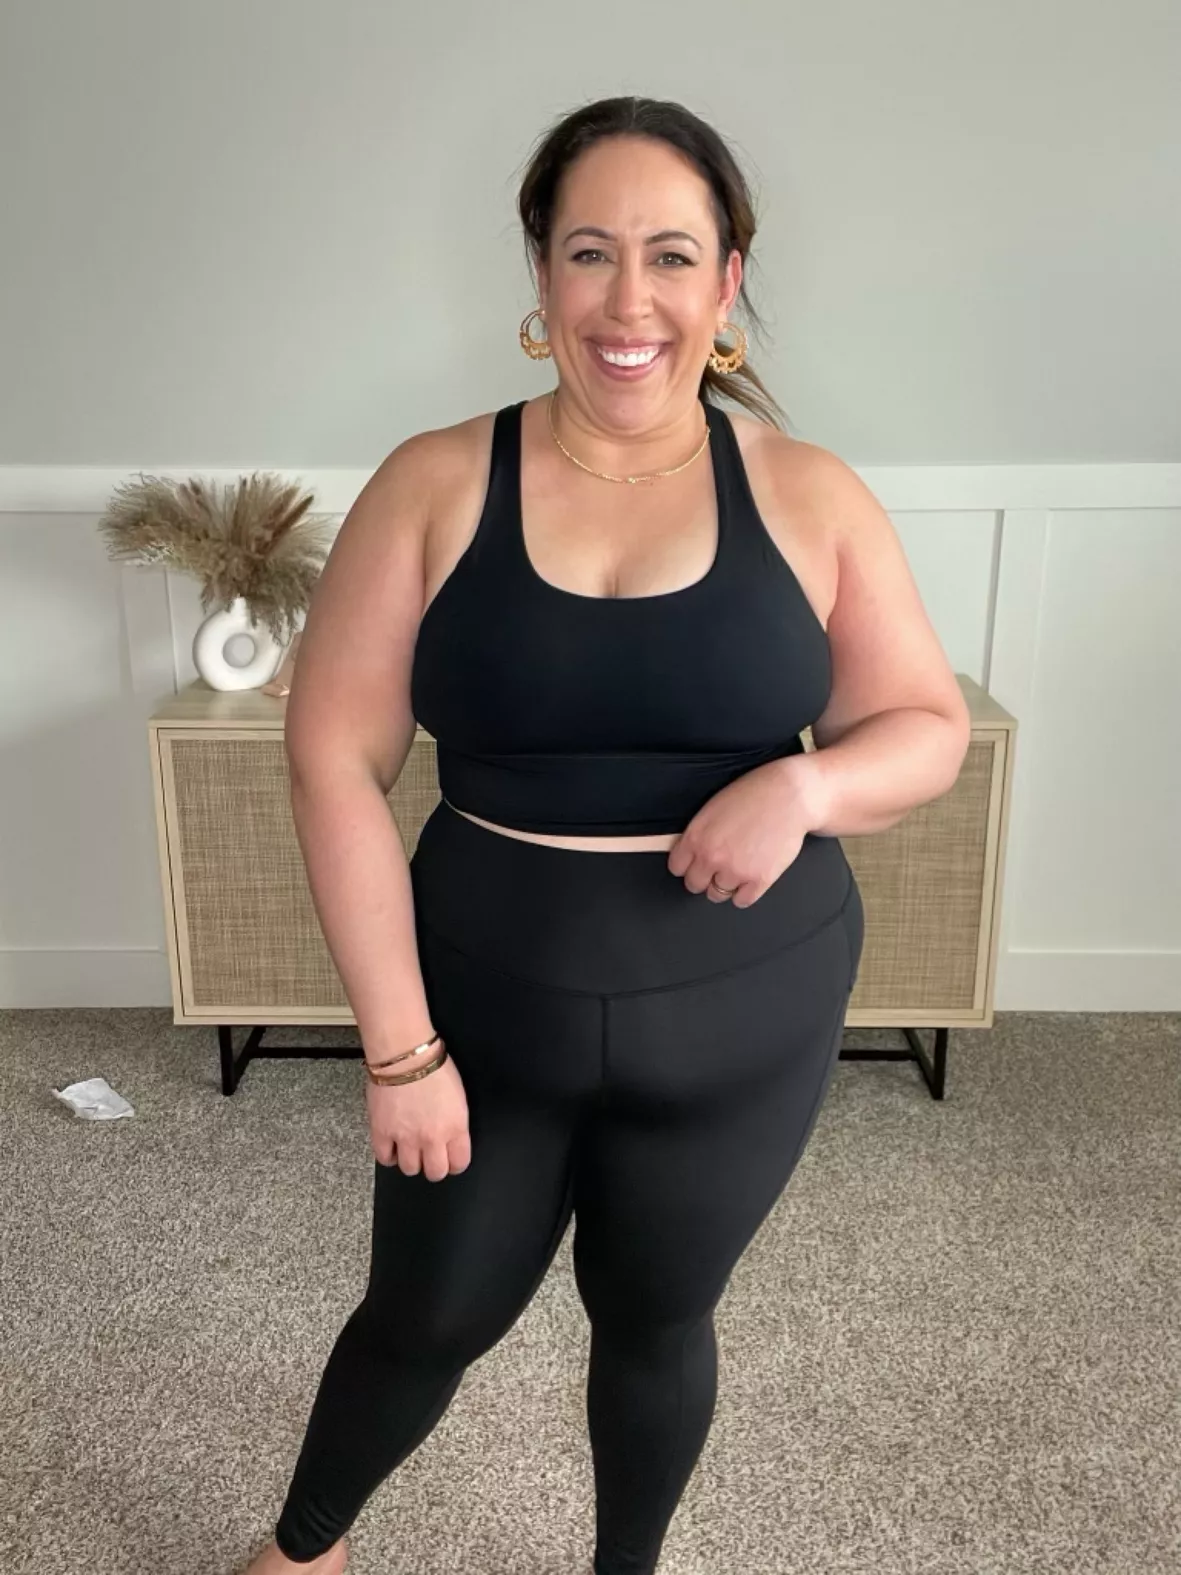 Where to Buy Plus Size Activewear - Ready To Stare